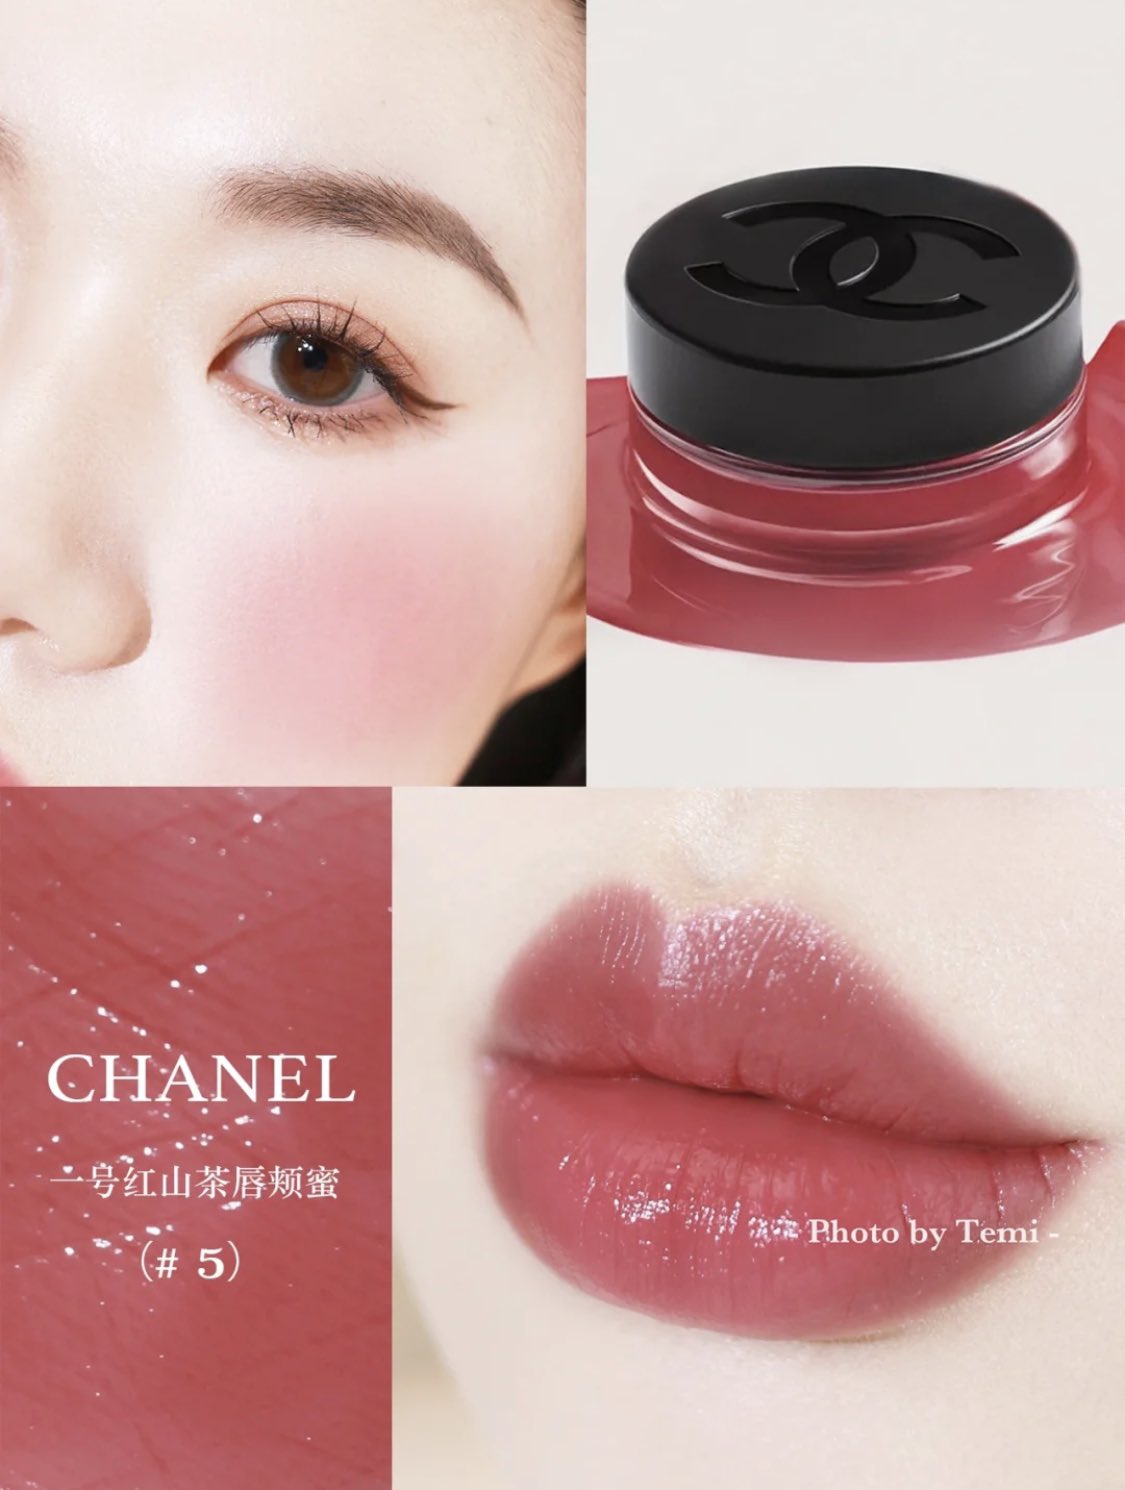 Chanel Wake-up Pink No. 1 Lip & Cheek Balm Review & Swatches